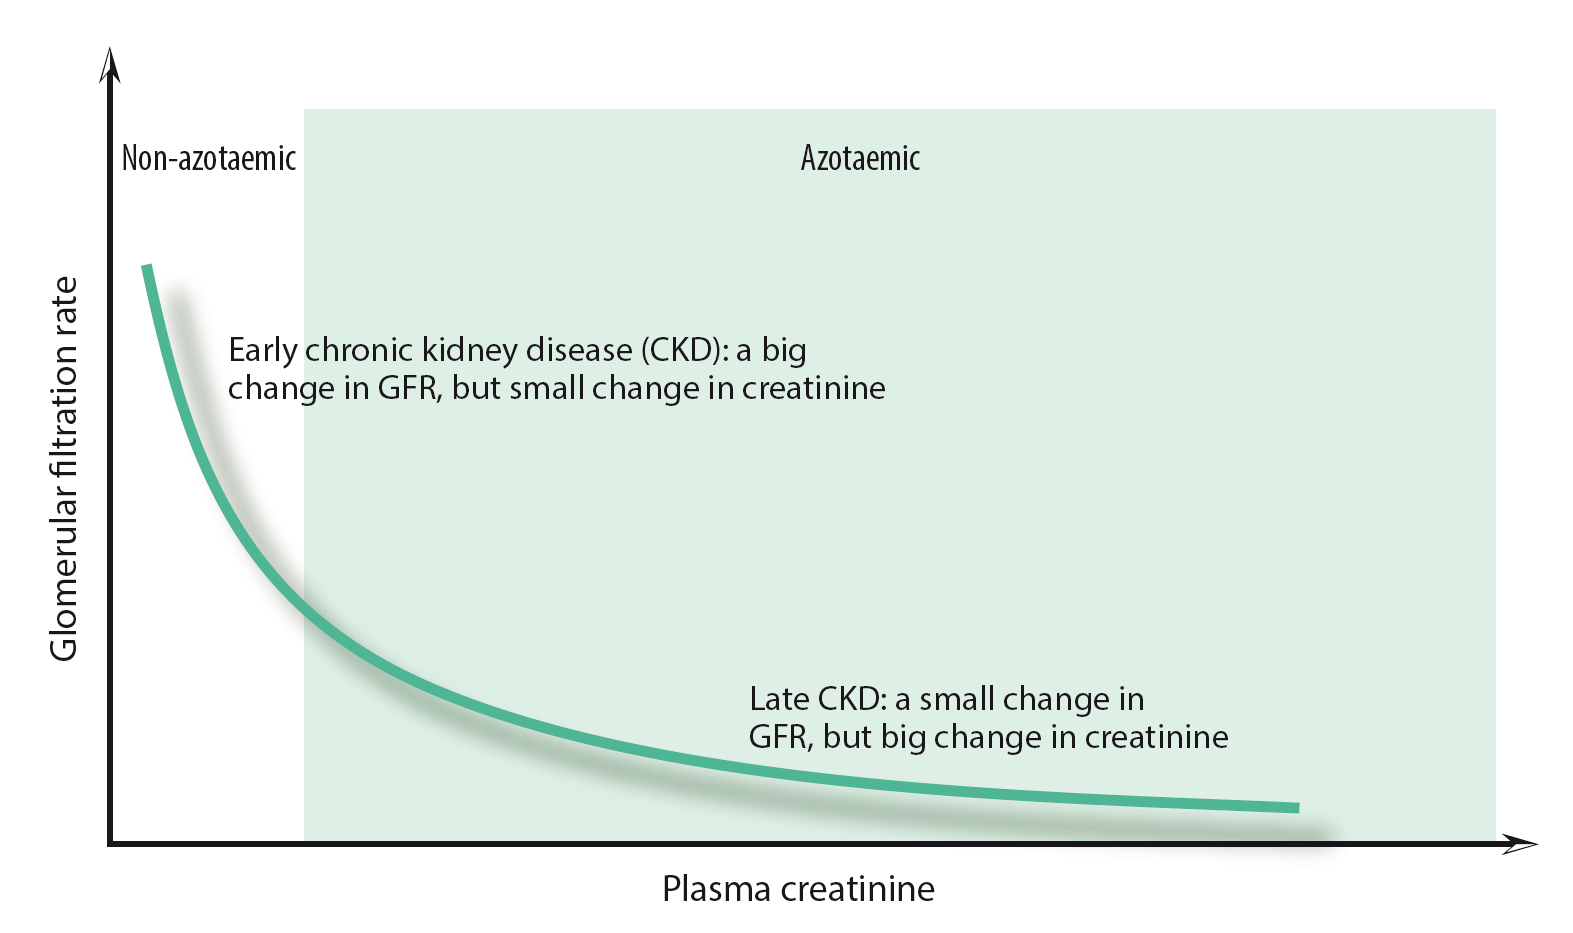 Figure 1. An inverse, non-linear relationship between plasma creatinine and glomerular filtration rate (GFR). Graph taken from Finco et al (1995)4.